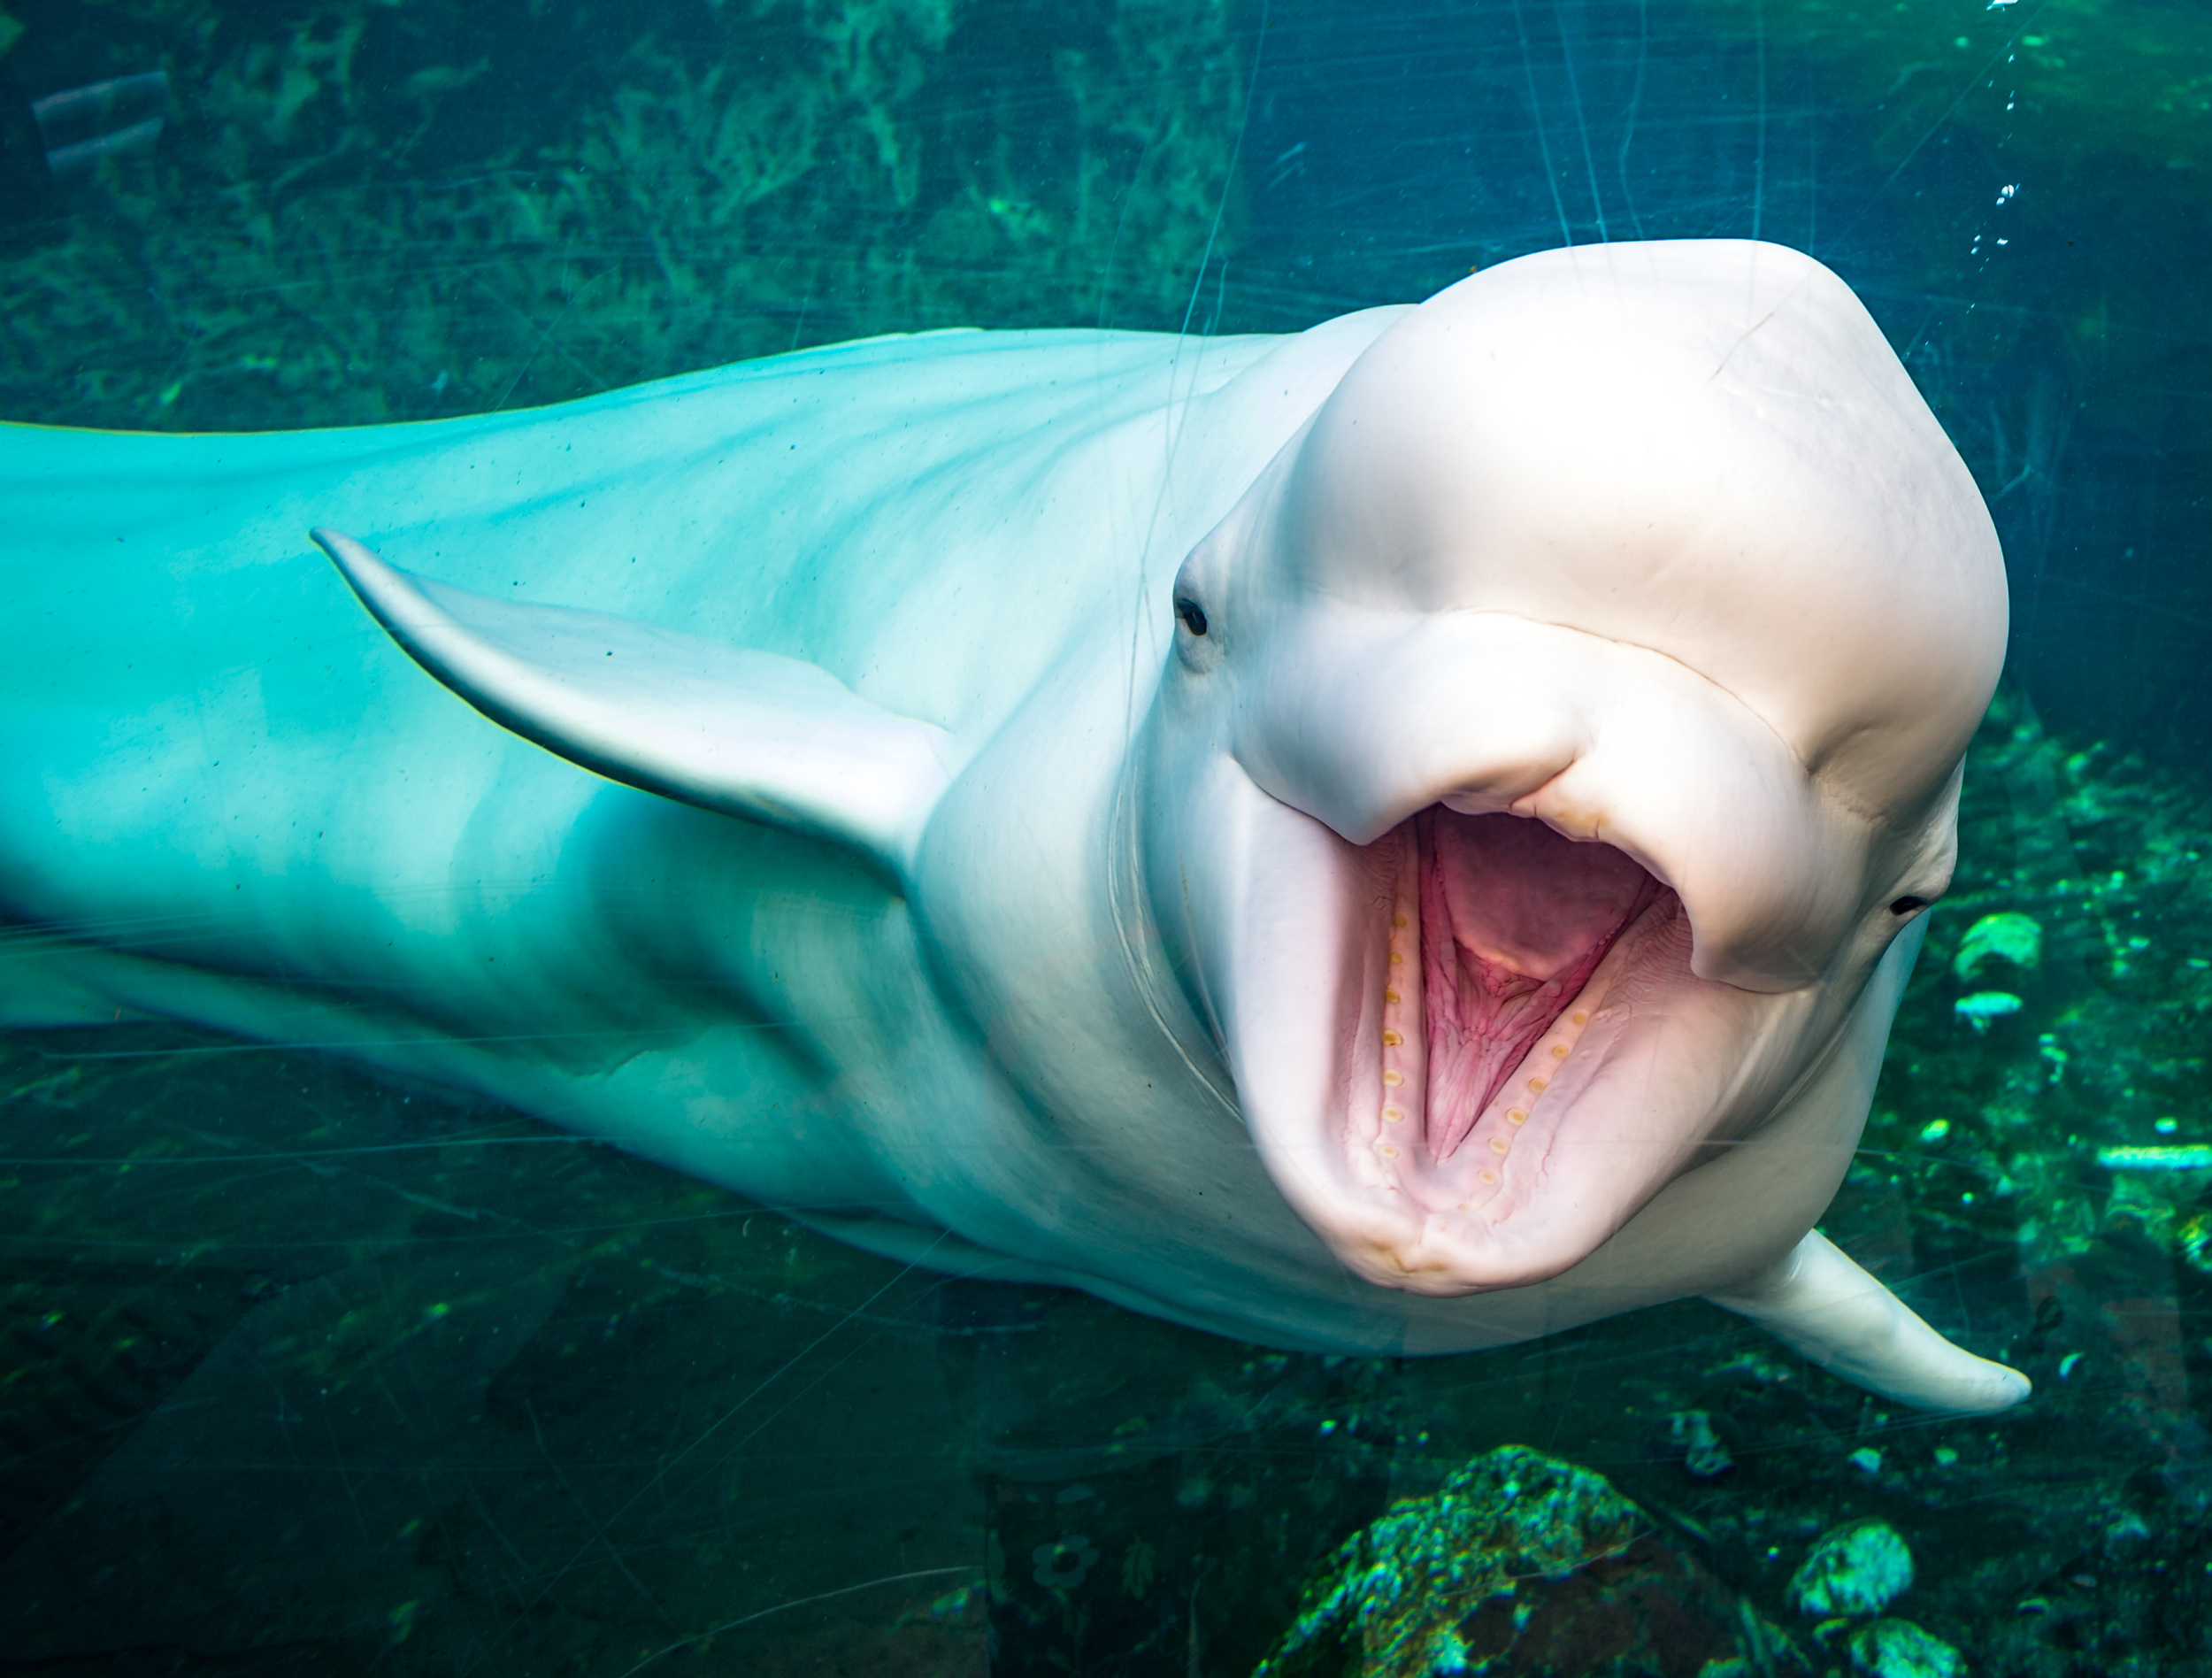 <p>The far north of a Canadian prairie province is probably more often associated with polar bears than marine life. But this is the best place in North America to see the adorable beluga whales. You can fly or take an overnight train from Winnipeg and then book a boat or kayak excursion to see the animals.</p><p><a href='https://www.msn.com/en-us/community/channel/vid-cj9pqbr0vn9in2b6ddcd8sfgpfq6x6utp44fssrv6mc2gtybw0us'>Follow us on MSN to see more of our exclusive lifestyle content.</a></p>